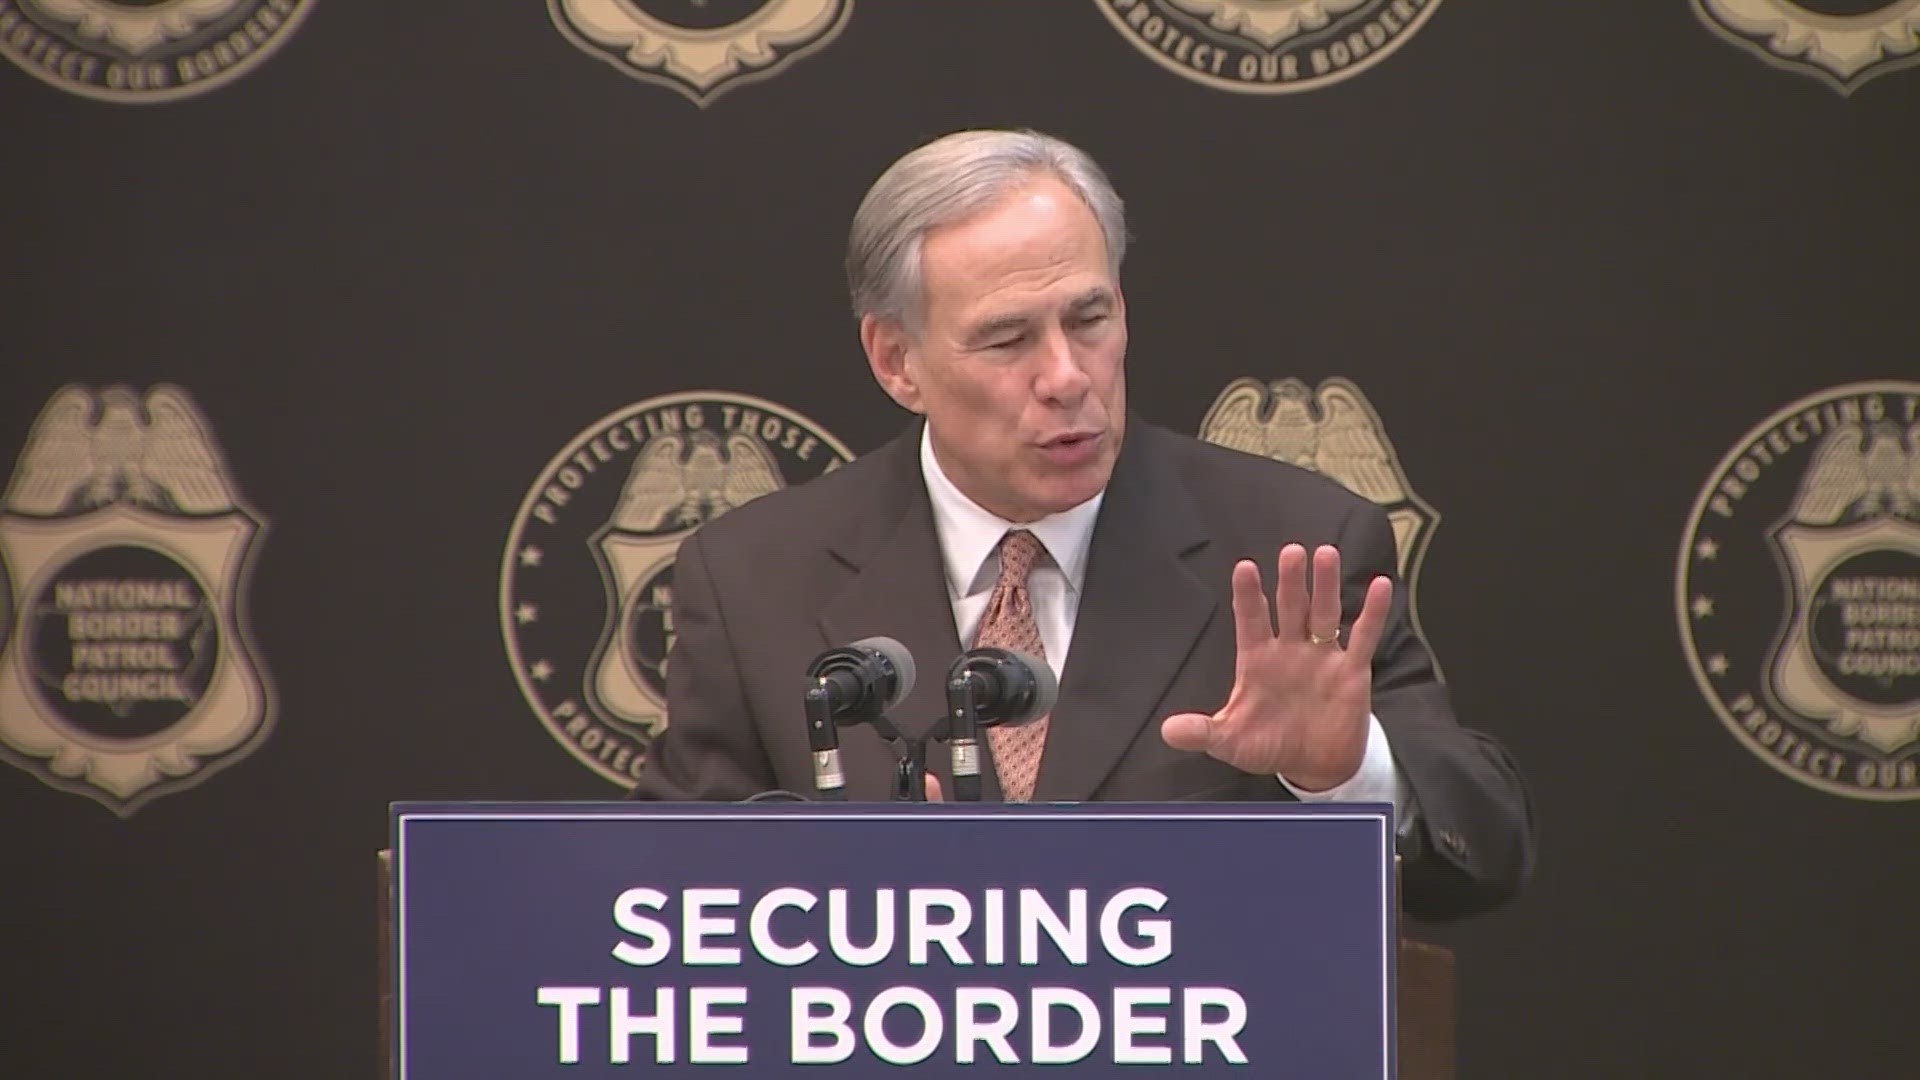 Texas Gov. Greg Abbott has no plans to slow down Operation Lone Star, which launched two years ago this month to help enhance border security.